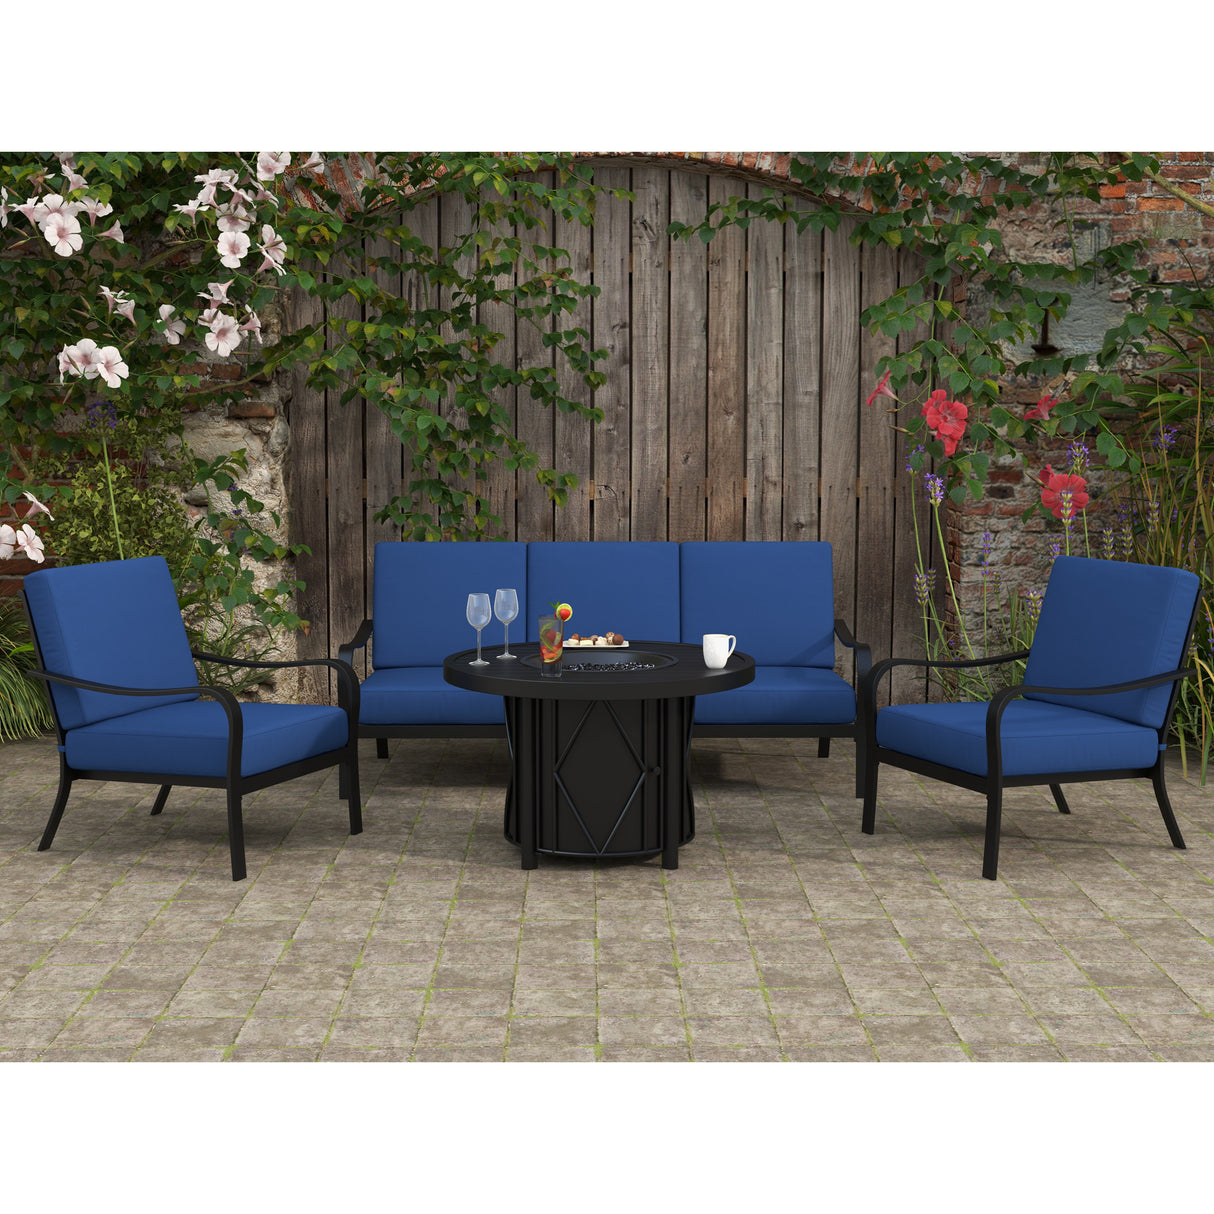 Ultimate Outdoor Firepit Seating Set: Modern 4-Piece Conversation, Lounge Set, Stylish Design, Durable Construction, Propane Round Firepit Table, Ideal for Patios, Gardens, Backyards